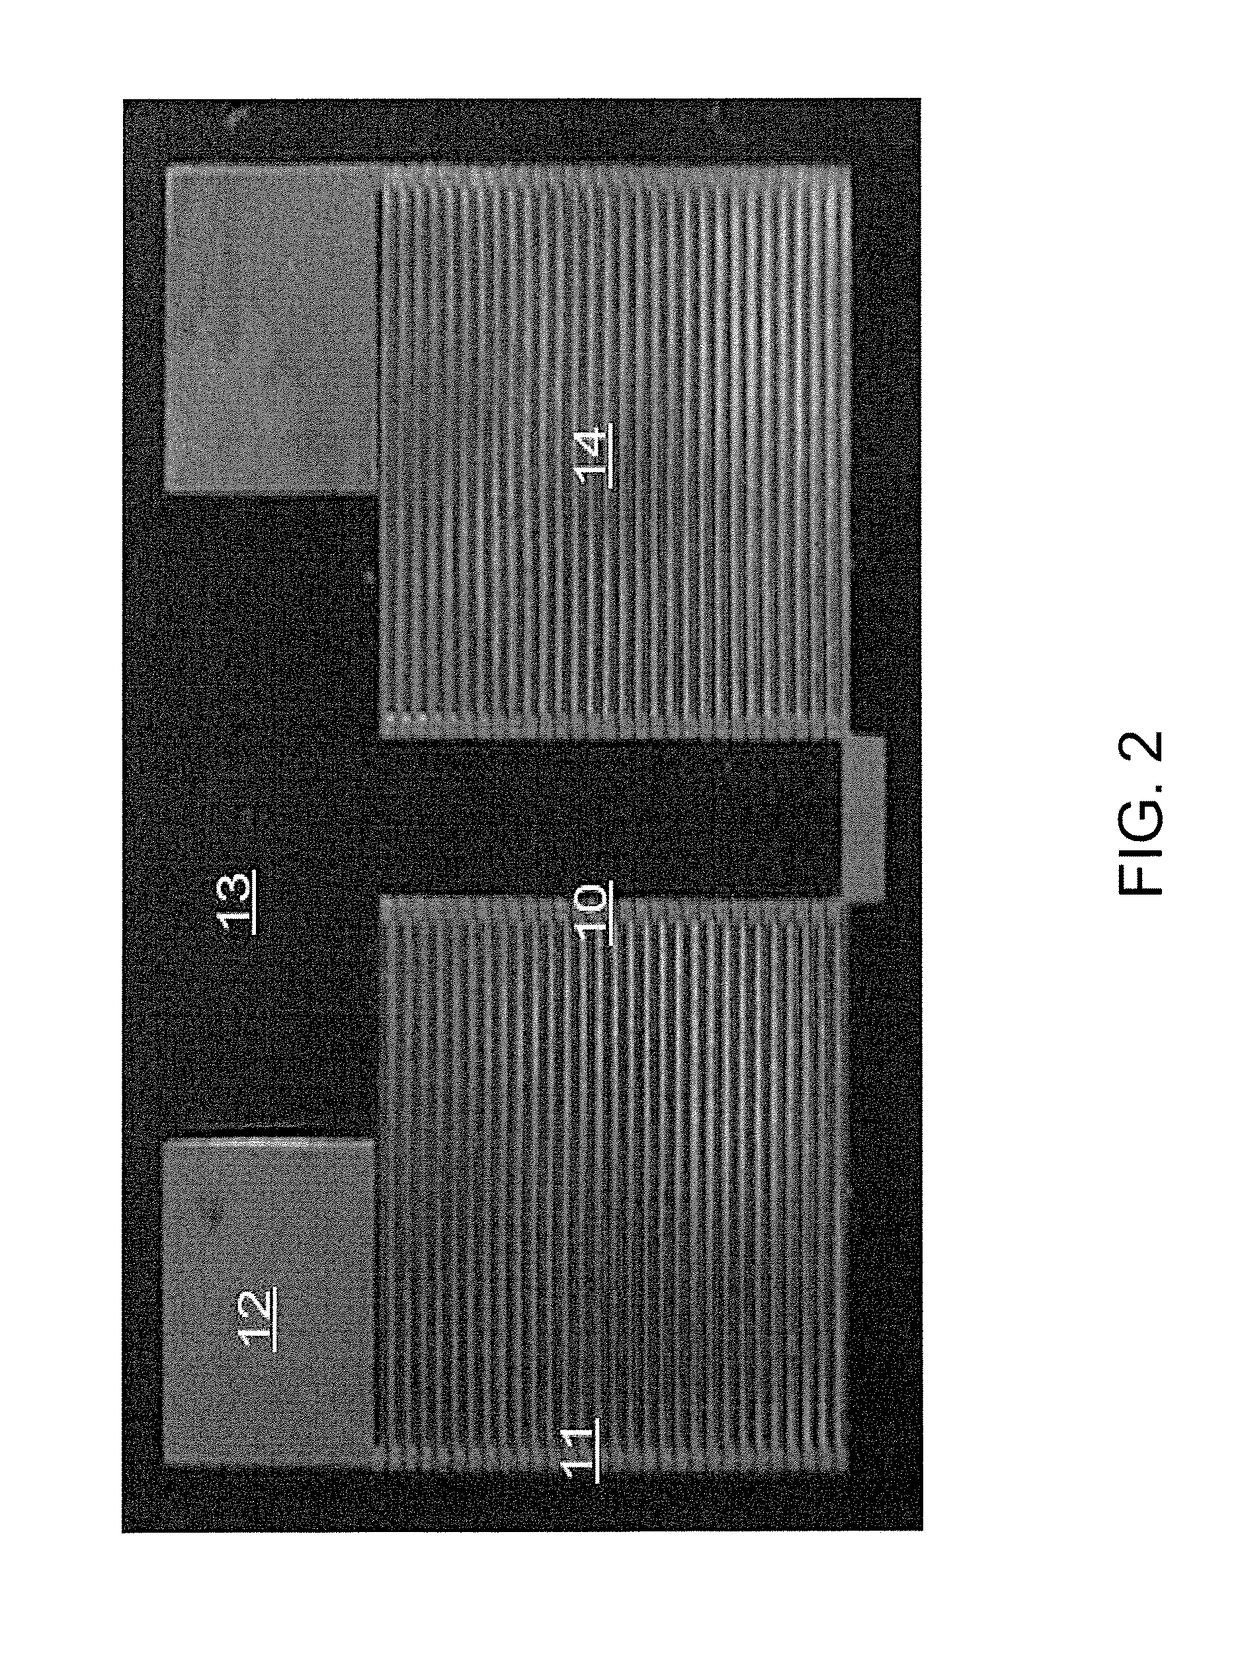 Breath analysis system, device and method employing nanoparticle-based sensor